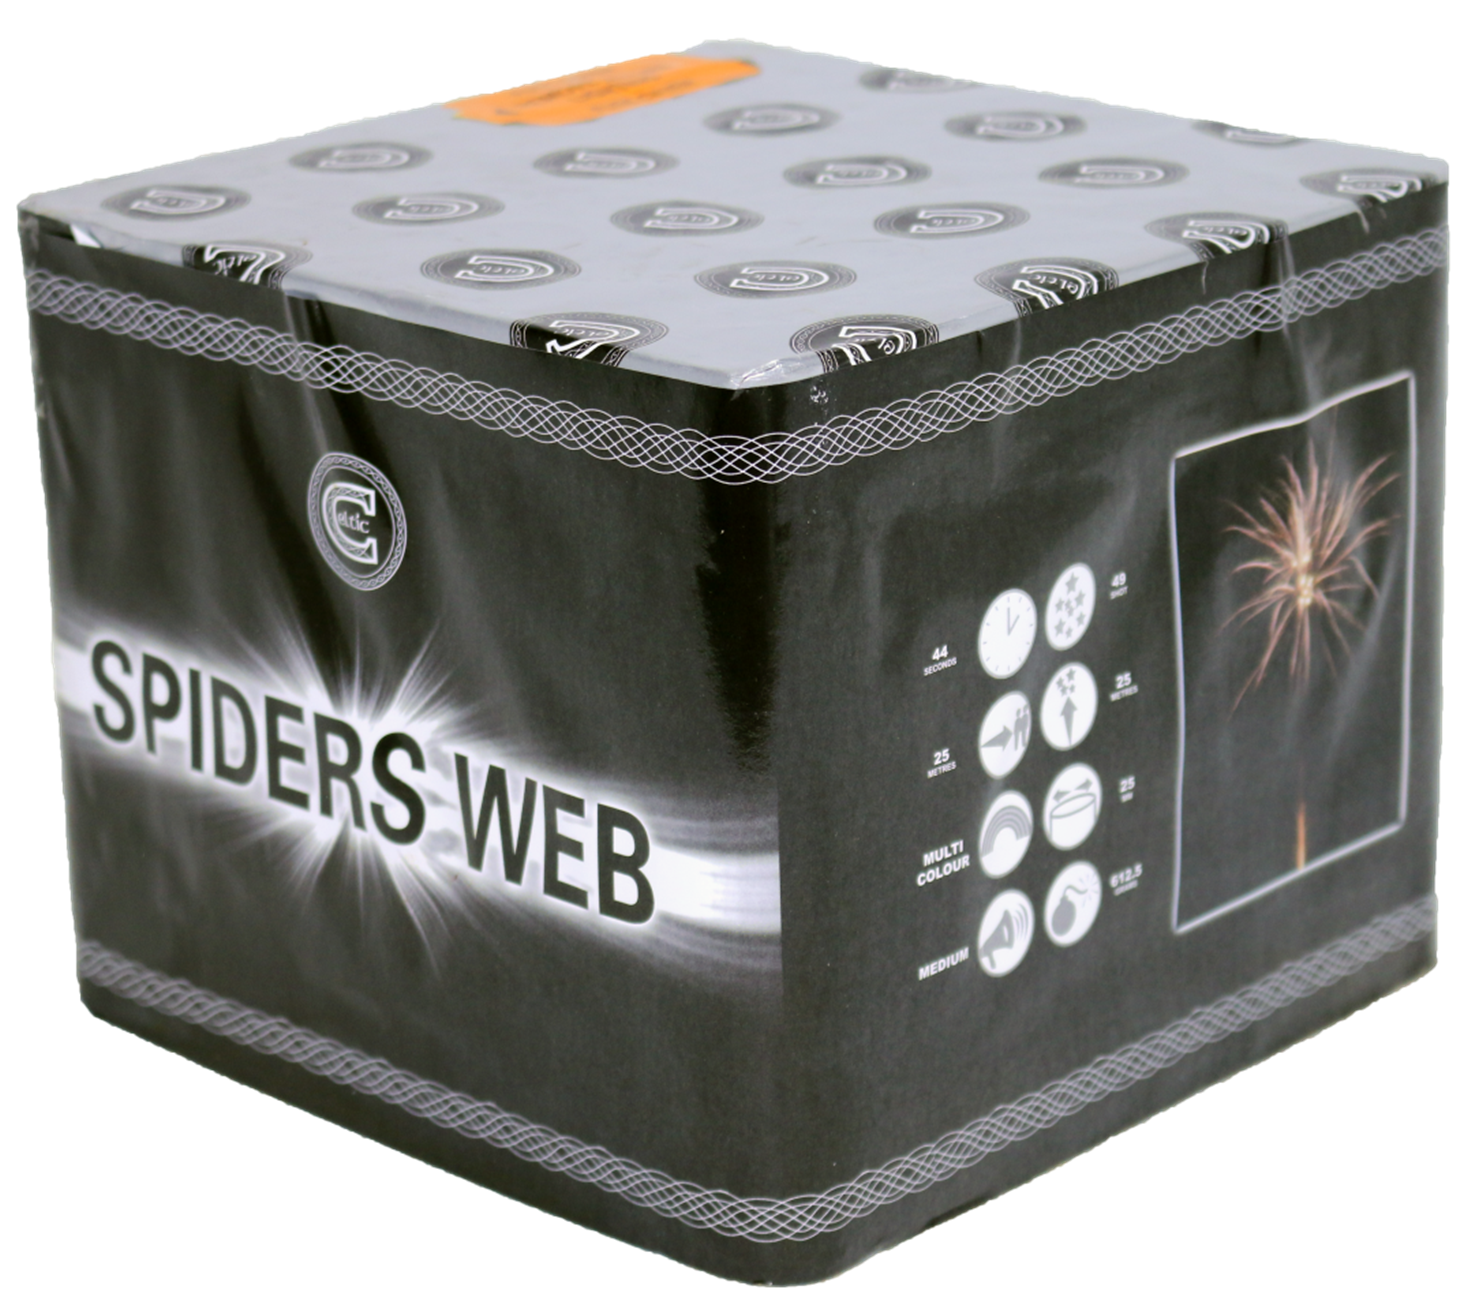 Spiders Web by Celtic Fireworks